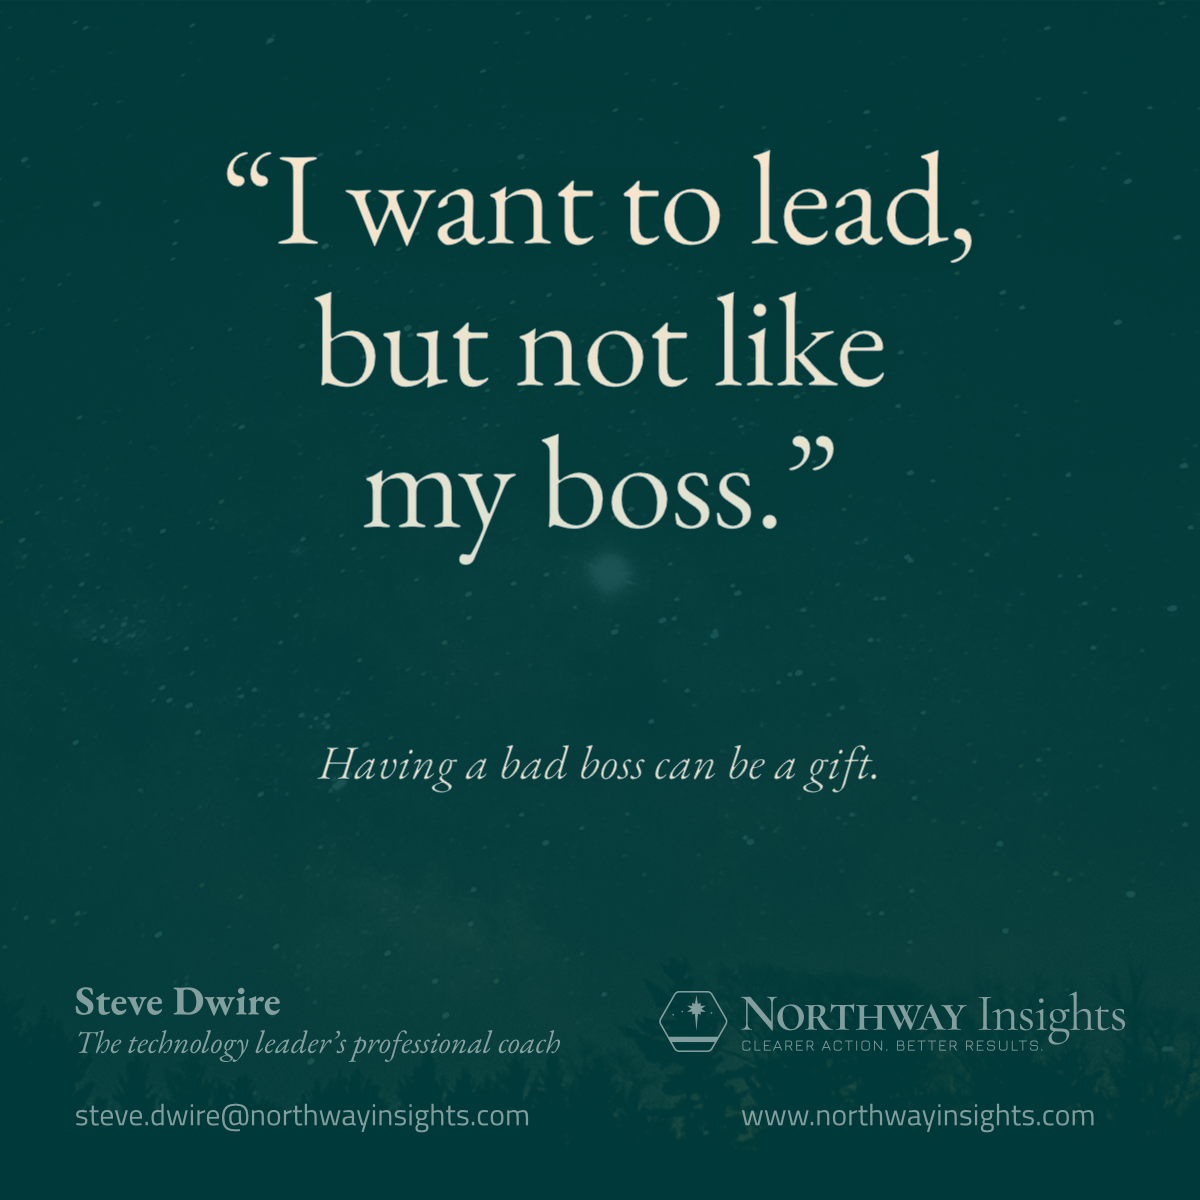 I want to lead, but not like my boss. (Having a bad boss can be a gift.)